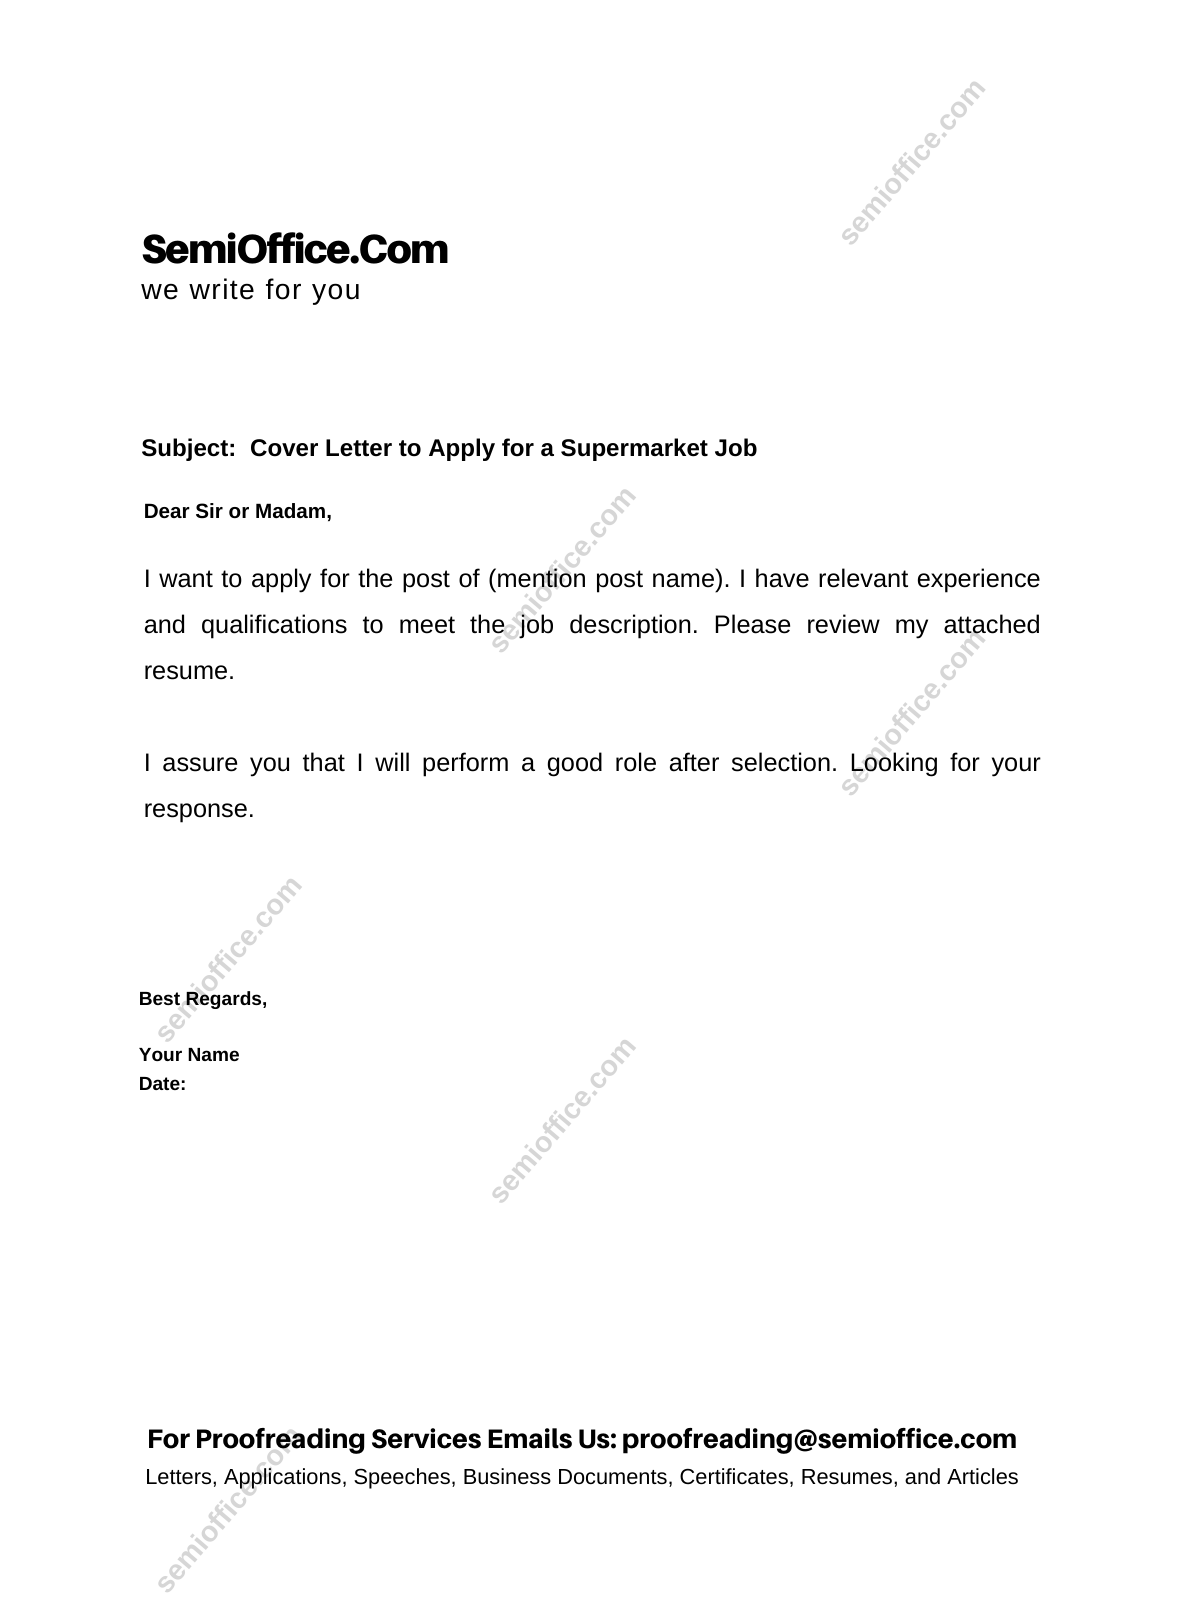 examples of application letter to a supermarket